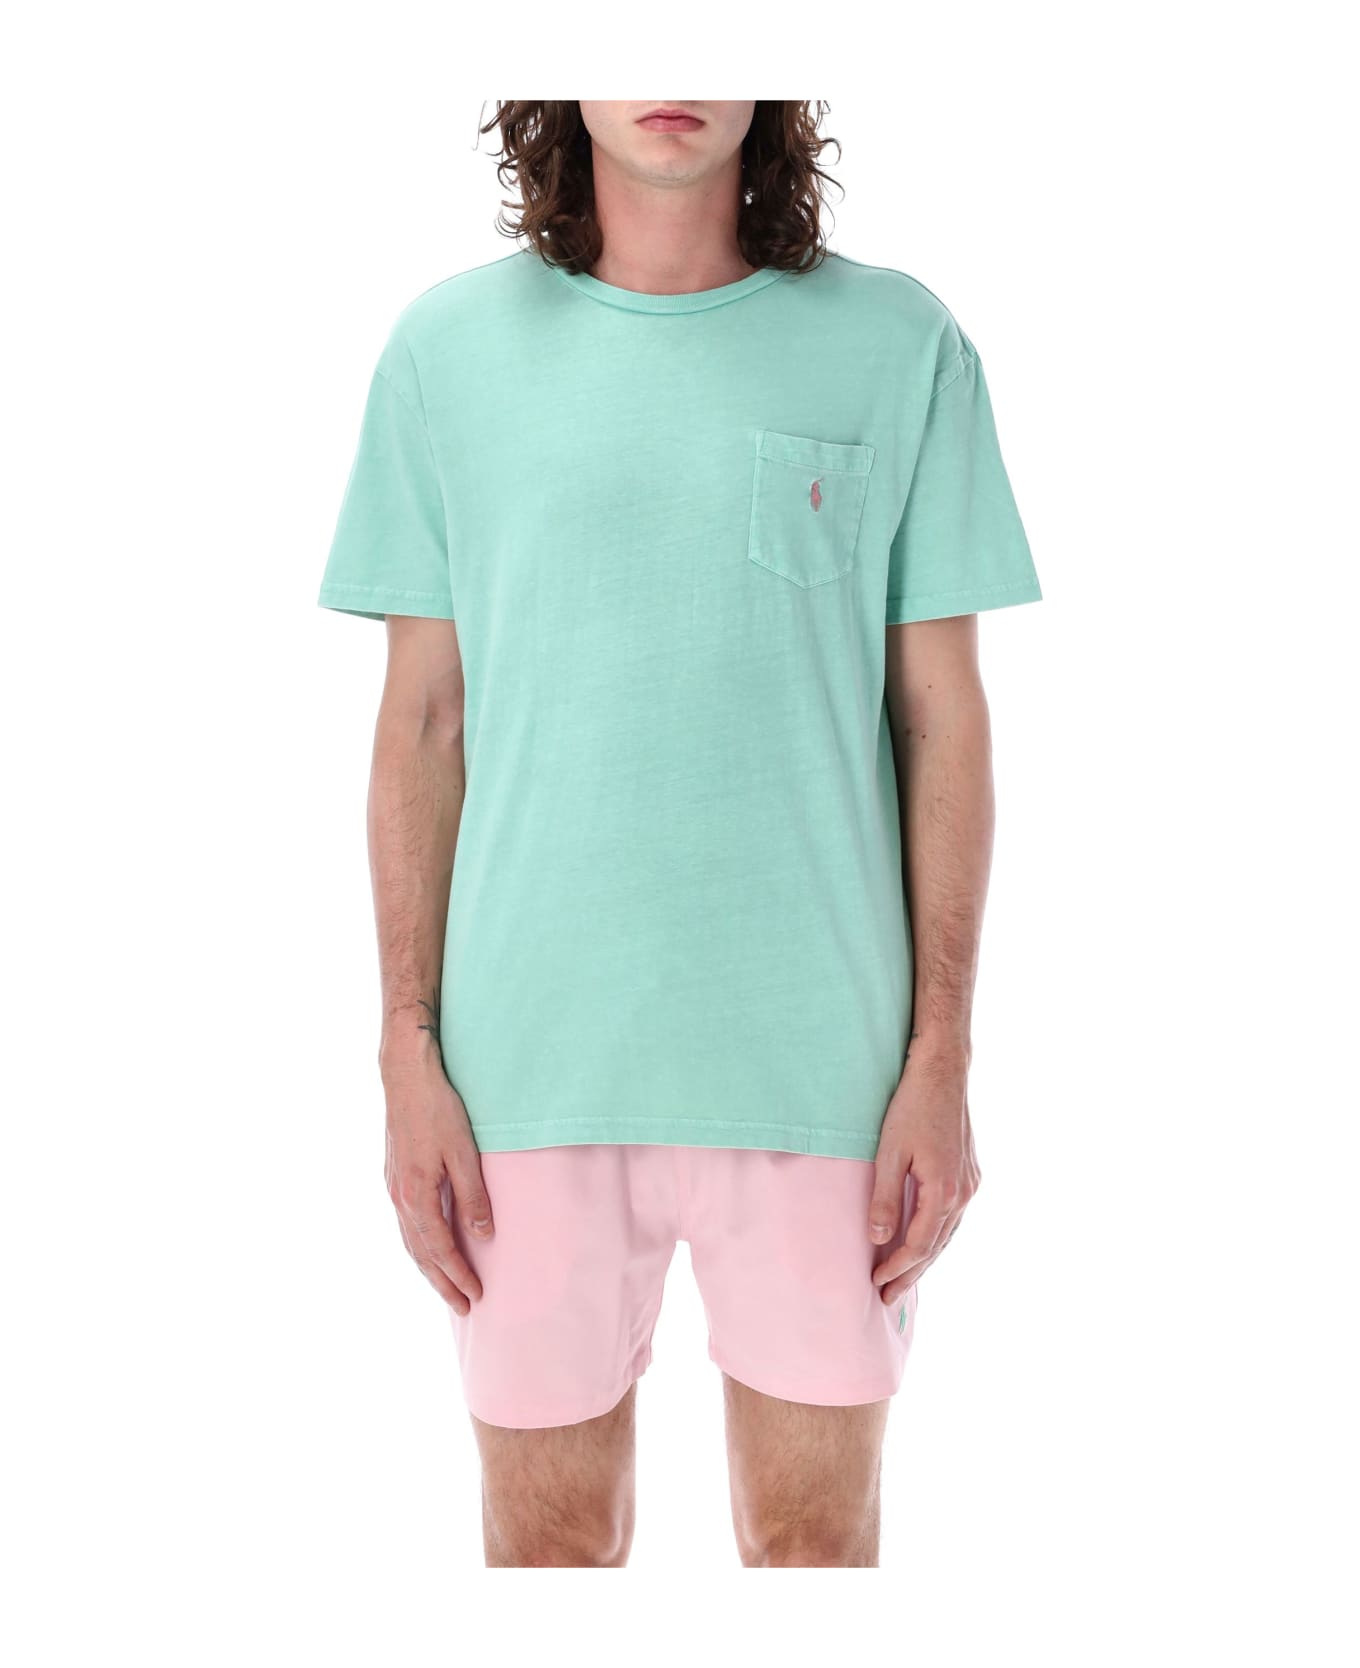 Polo Ralph Lauren Washed Pocket Tee - MINT